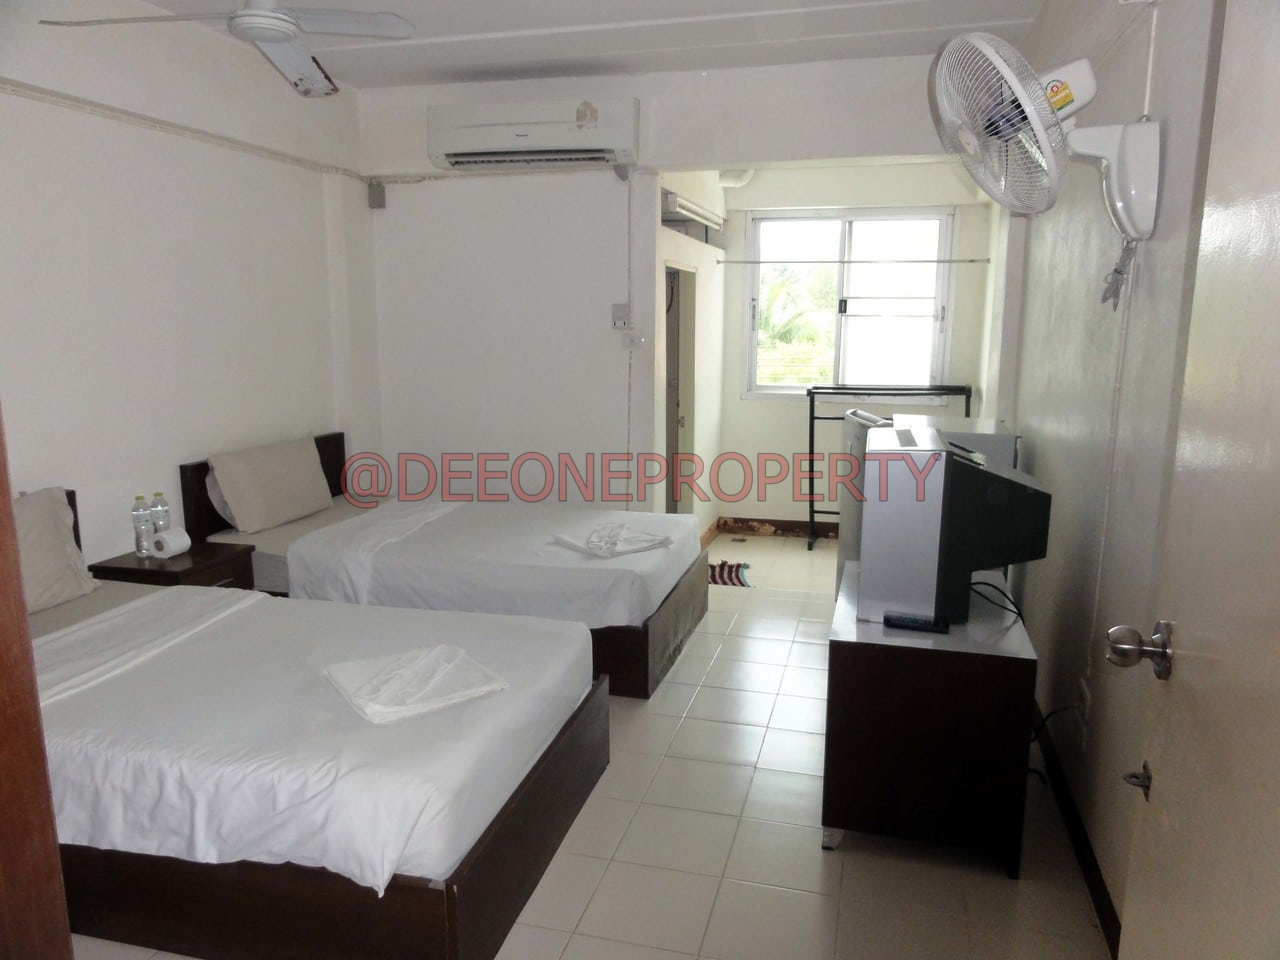 Budget Room for Rent – North West Coast, Koh Chang